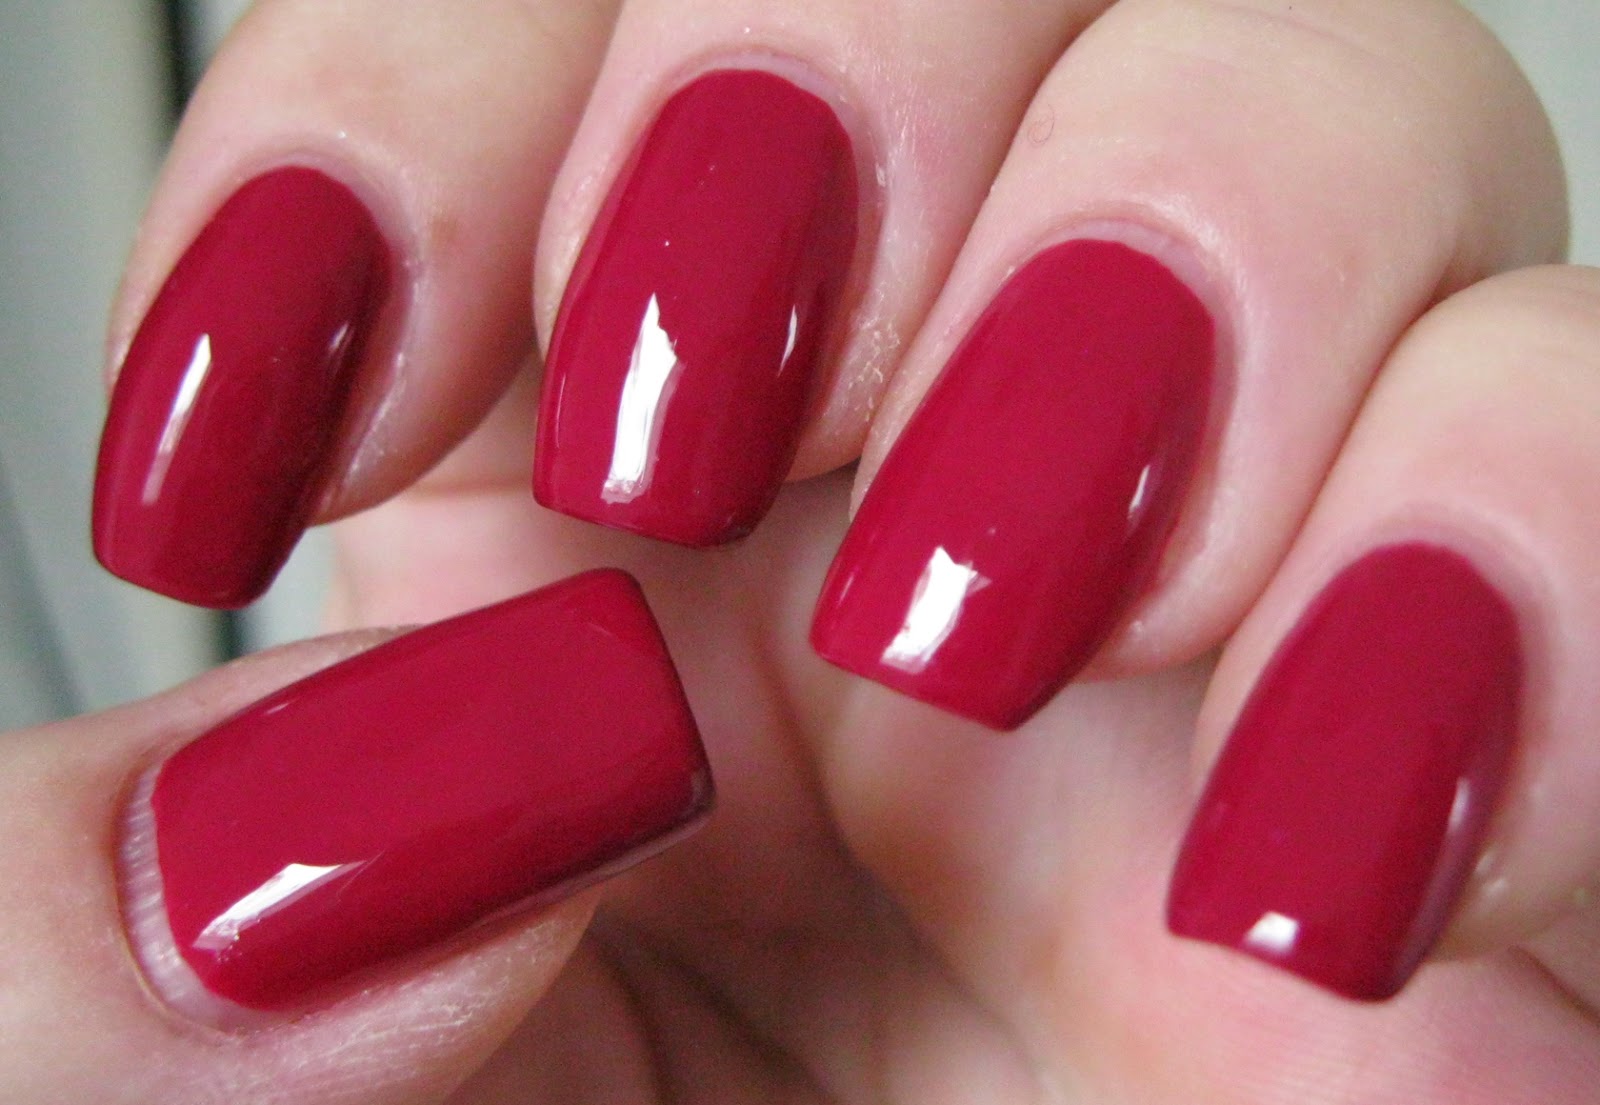 6. OPI "Miami Beet" from the South Beach Collection - wide 6